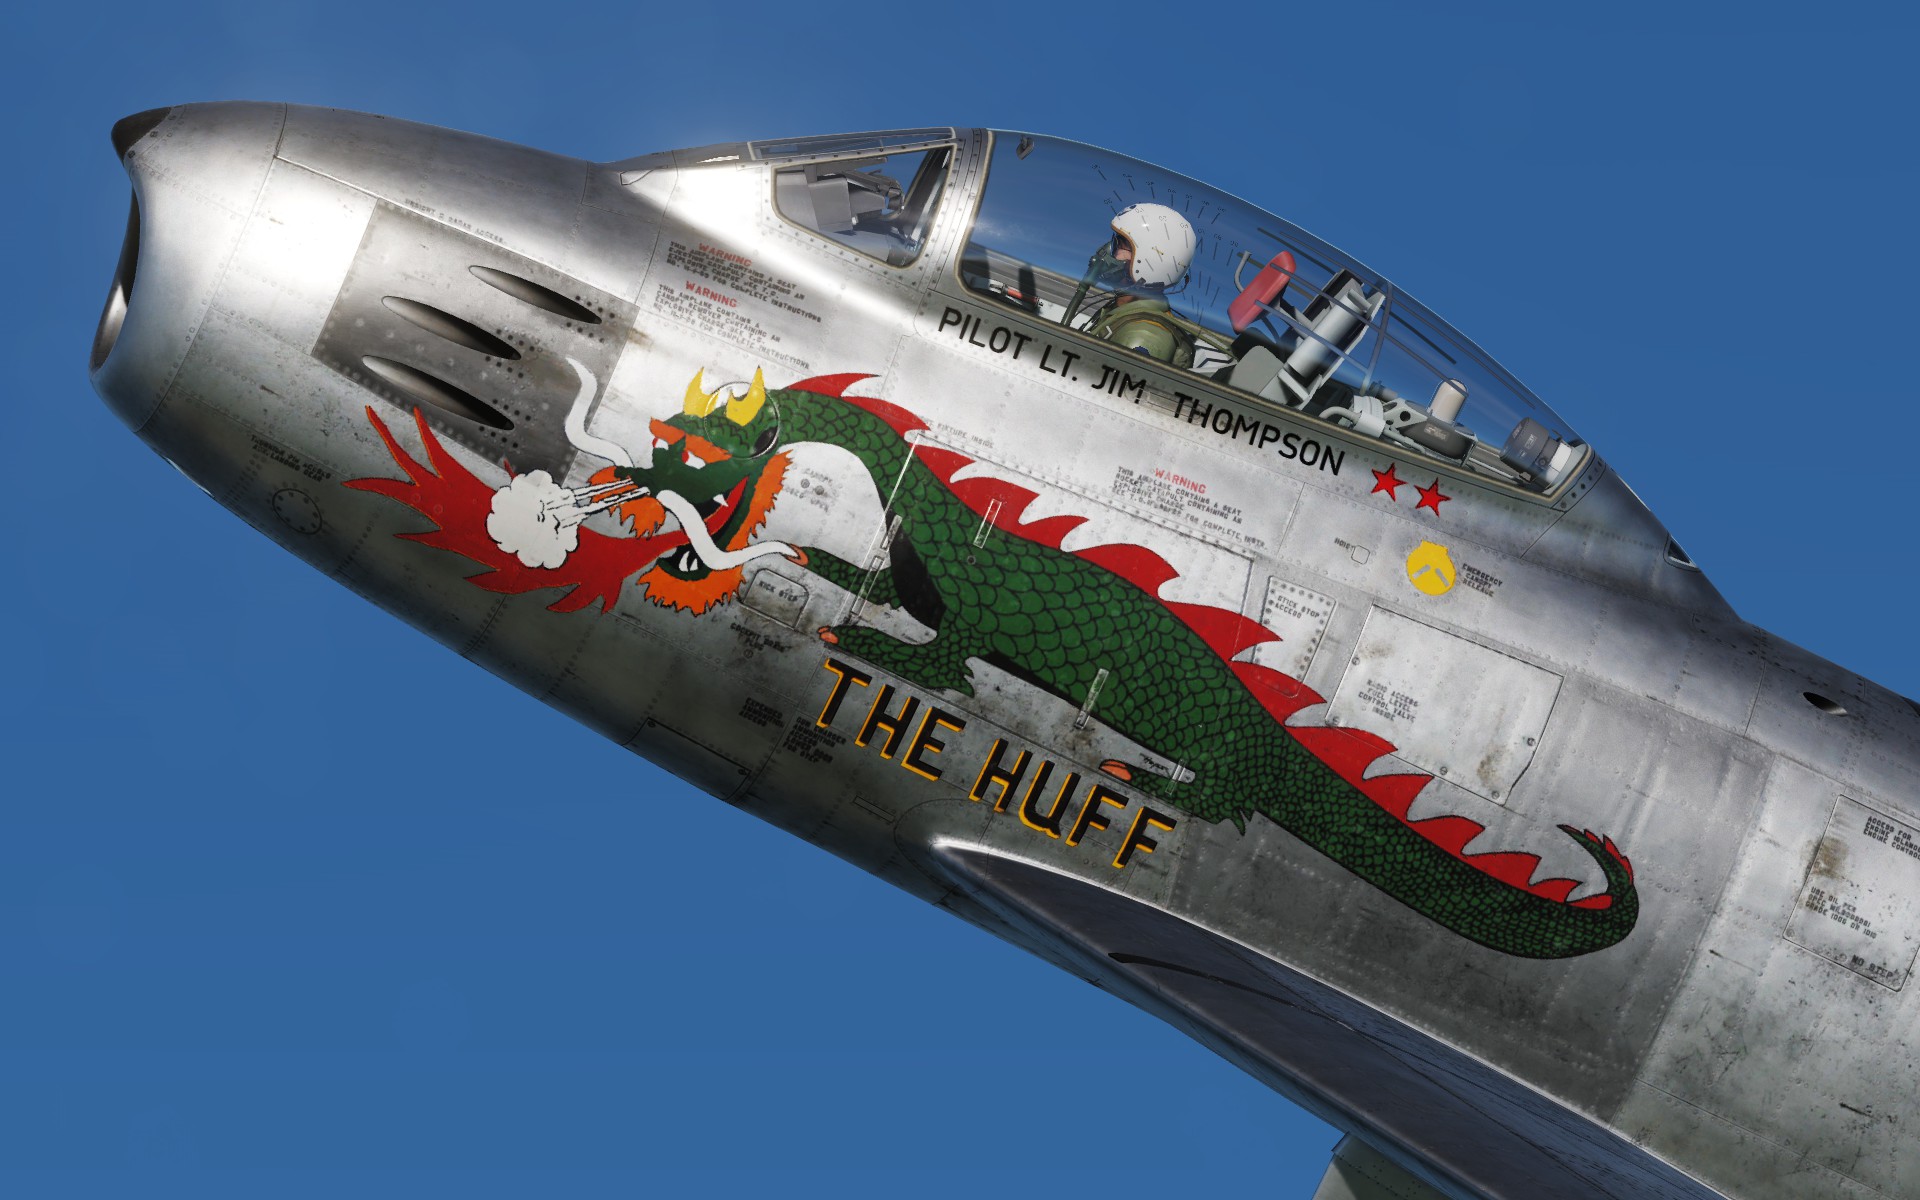 F-86 Sabre 'The Huff'